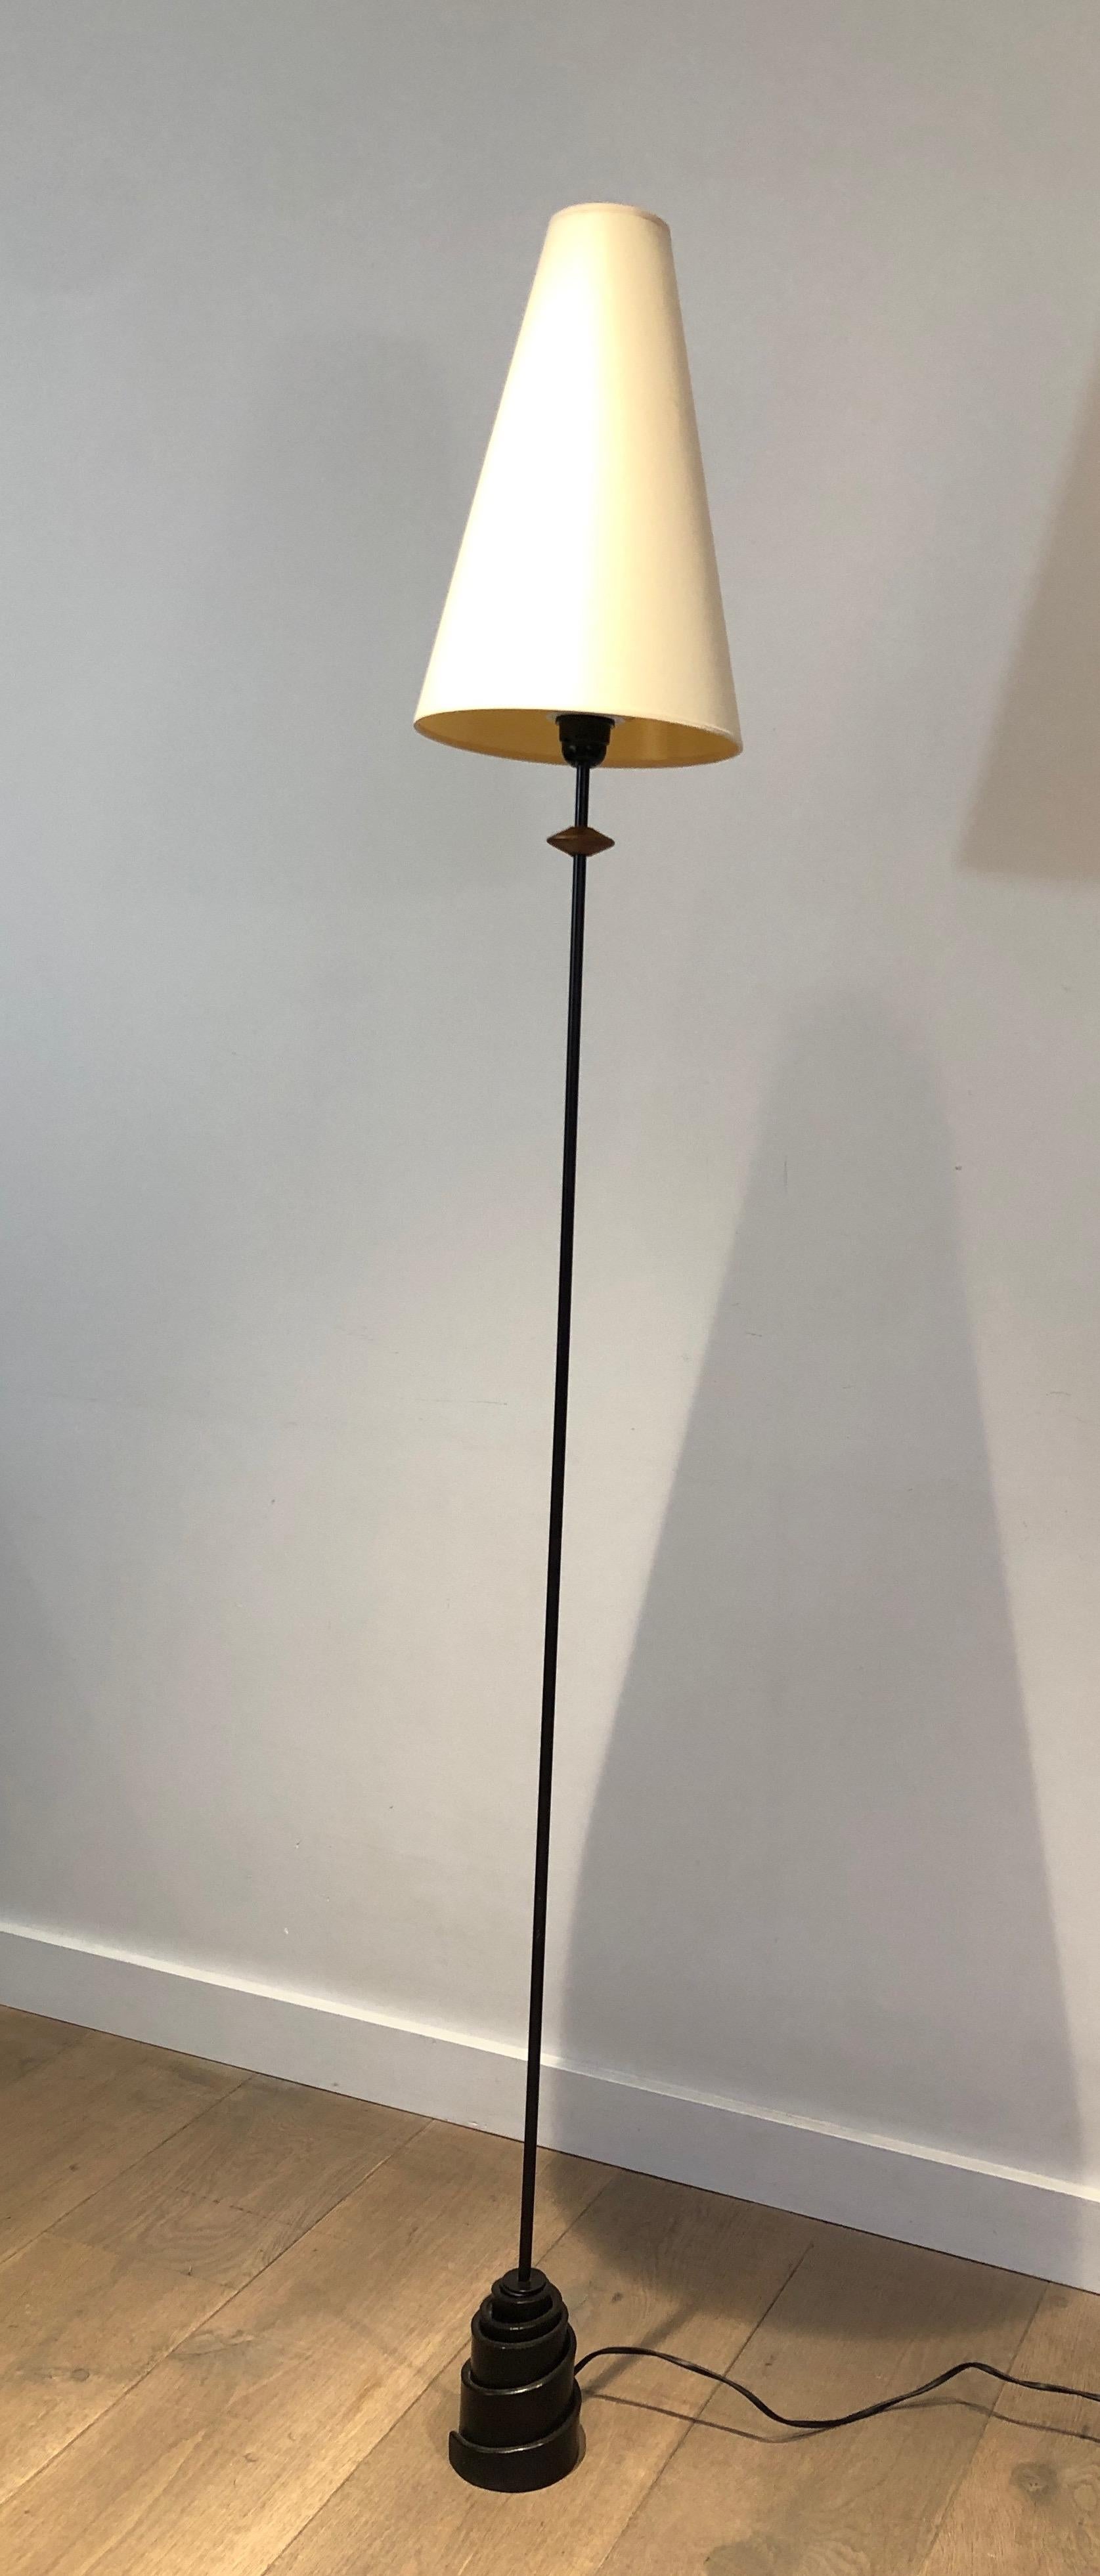 Mid-Century Modern Wrought Iron Floor Lamp with Cast Iron Base; French Work, circa 1970 For Sale